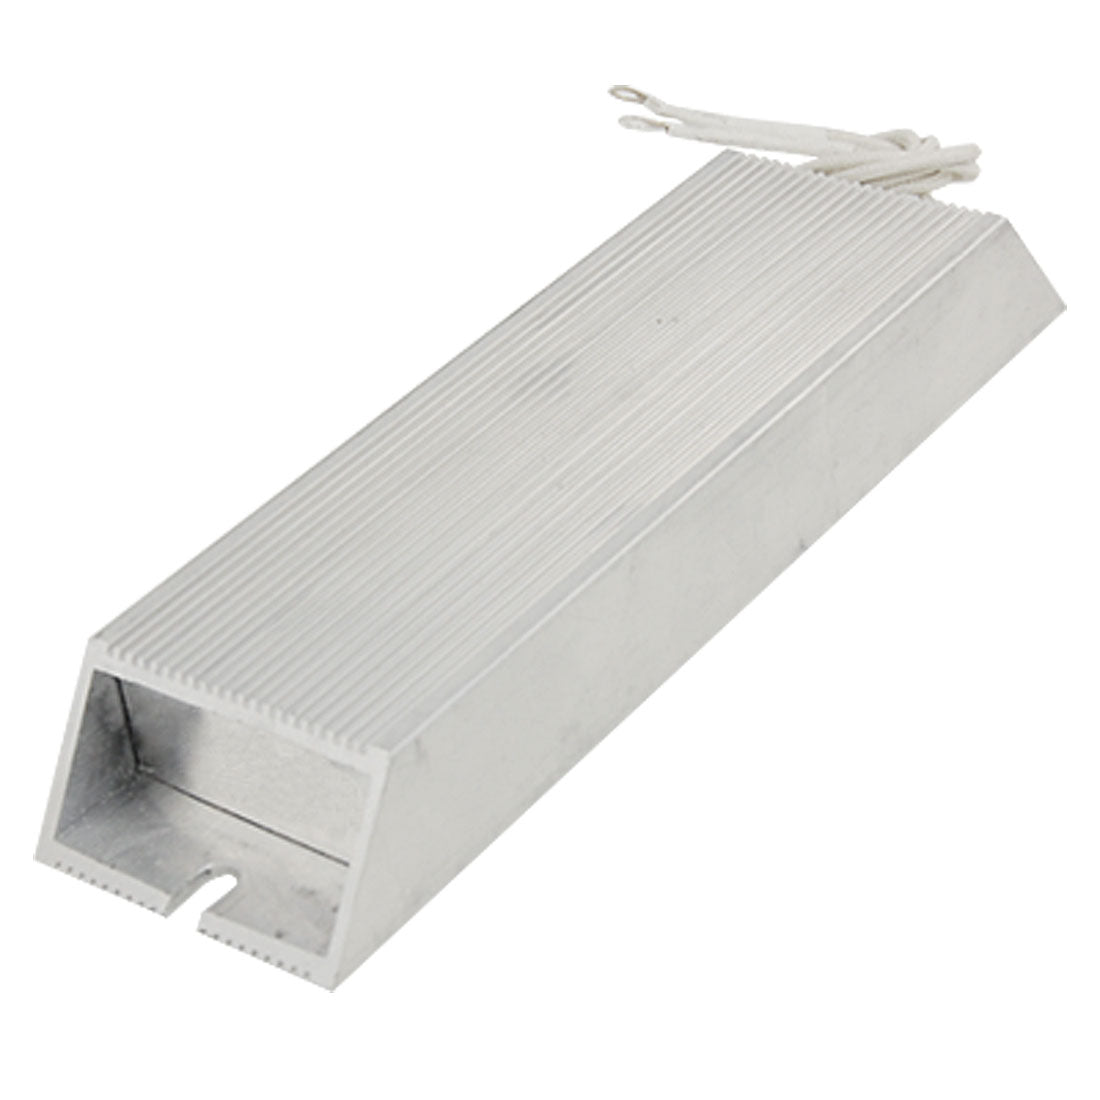 uxcell Uxcell 300W 100ohm 5% Aluminum Housed Resistor Silver Tone